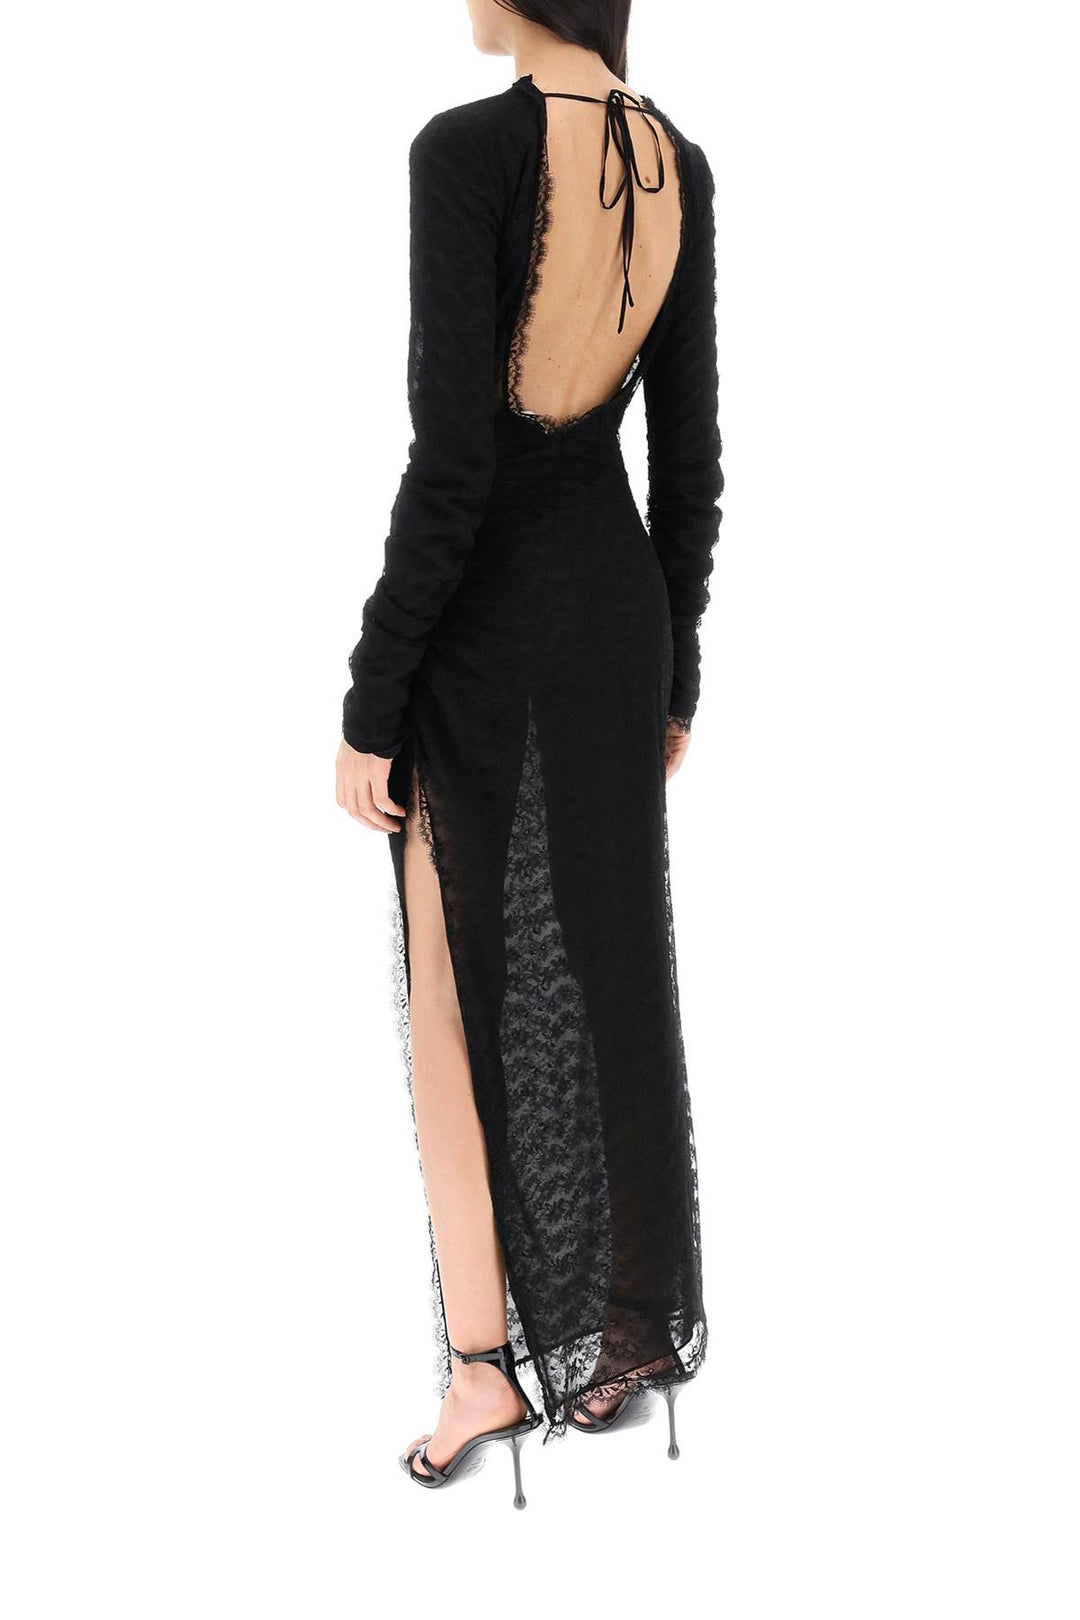 Alessandra Rich Long Lace Gown   Black